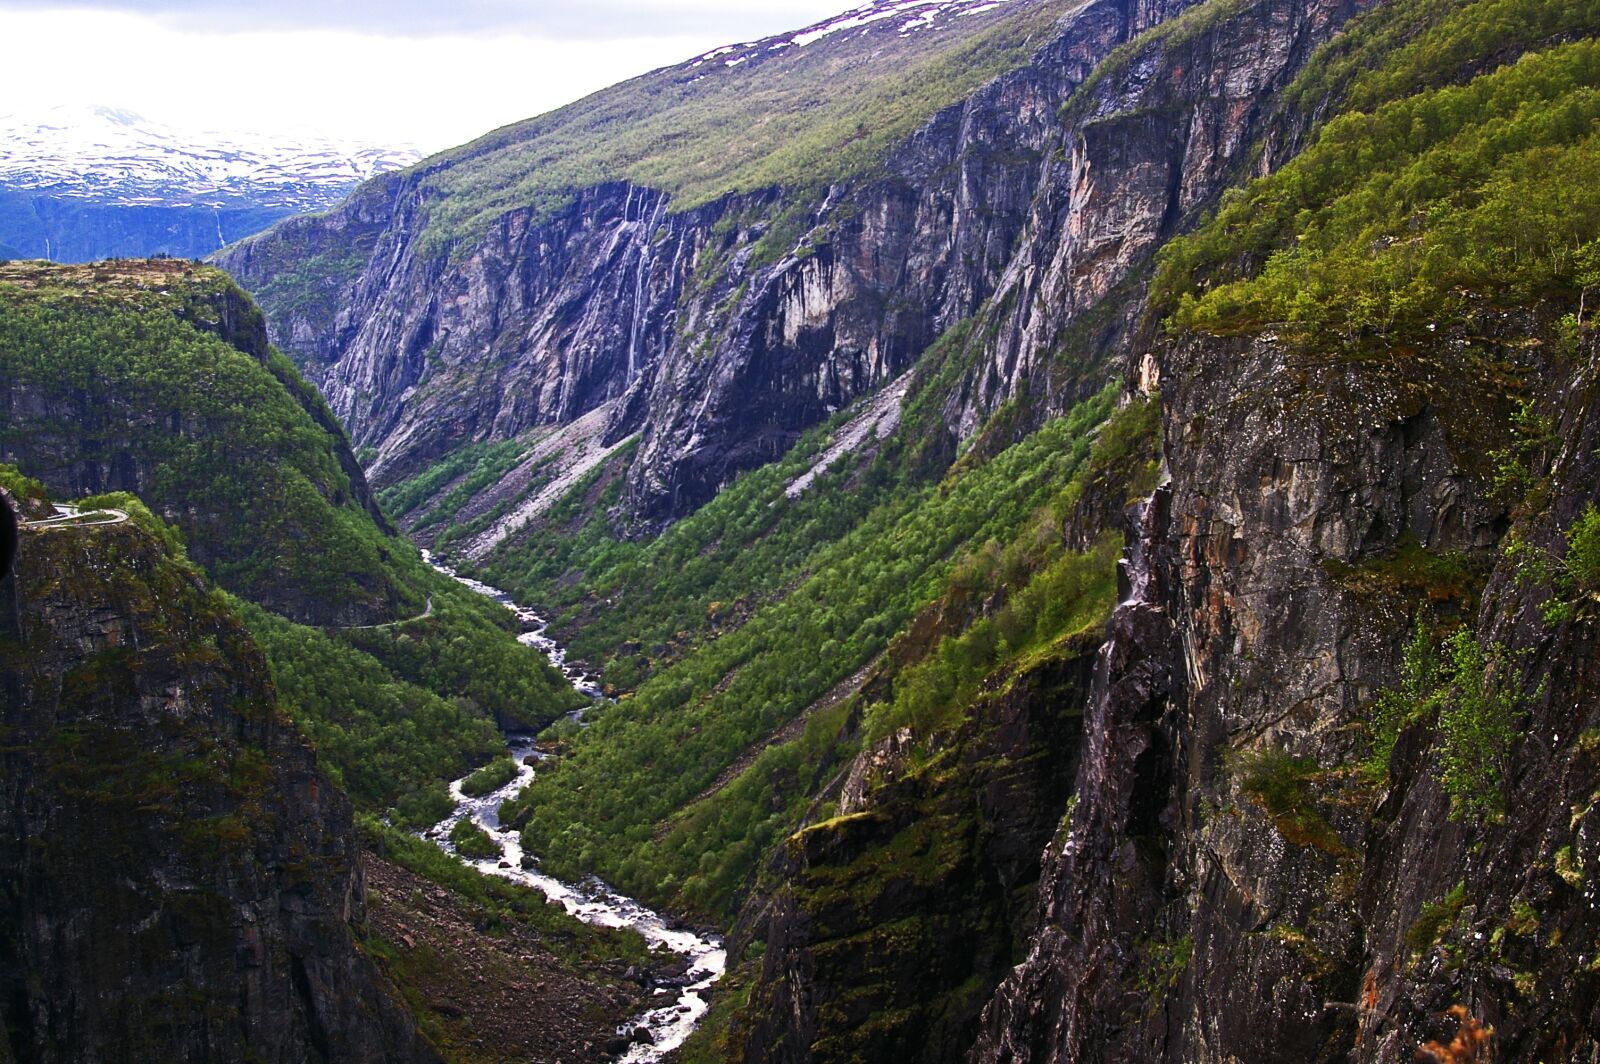 Pentax *ist DL2 sample photo. Norway, gorge, nature photography